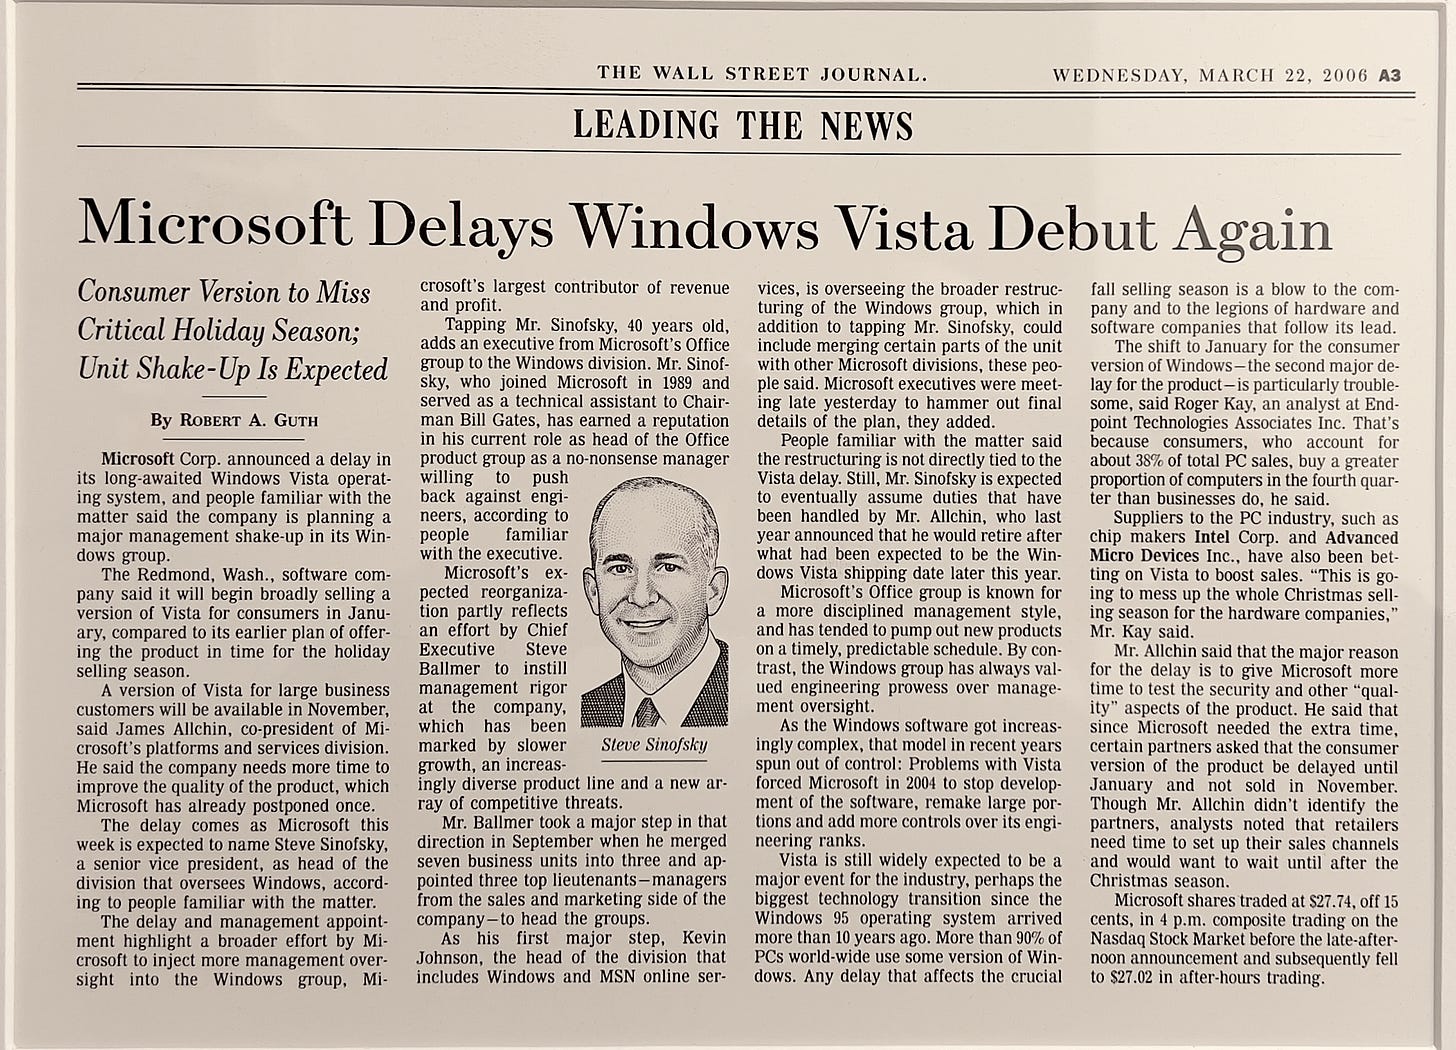 Mierosoft Delays Windows Vista Debut Again Consumer Version to Miss crosoft's largest contributor of revenue vices, is overseeing the broader restruc- fall selling season is a blow to the com- and profit. turing of the Windows group, which in pany and to the legions of hardware and Critical Holiday Season; Unit Shake-Up Is Expected Tapping Mr. Sinofsky, 40 years old, addition to tapping Mr. Sinofsky, could software companies that follow its lead. adds an executive from Microsoft's Office include merging certain parts of the unit The shift to January for the consumer group to the Windows division. Mr. Sinof- with other Microsoft divisions, these peo- version of Windows - the second major de- sky, who joined Microsoft in 1989 and ple said. Microsoft executives were meet- lay for the product - is particularly trouble- served as a technical assistant to Chair- ing late yesterday to hammer out final some, said Roger Kay, an analyst at End- By ROBERT A. GUTH man Bill Gates, has earned a reputation details of the plan, they added. point Technologies Associates Inc. That's in his current role as head of the Office People familiar with the matter said because consumers, who account for Microsoft Corp. announced a delav in product group as a no-nonsense manager the restructuring is not directly tied to the about 38% of total PC sales, buy a greater its long-awaited Windows Vista operat- willing to push Vista delay. Still, Mr. Sinofsky is expected proportion of computers in the fourth quar- ing system, and people familiar with the back against engi- to eventually assume duties that have ter than businesses do. he said. matter said the company is planning a neers, according to been handled by Mr. Allchin, who last Suppliers to the PC industry, such as major management shakeup in its Win- people familiar year announced that he would retire after chip makers Intel Corp. and Advanced dows group. with the executive. what had been expected to be the Win- Micro Devices Inc., have also been bet- The Redmond, Wash., software com- Microsoft's ex- dows Vista shipping date later this year. ting on Vista to boost sales. "This is go- pany said it will begin broadly selling a pected reorganiza- Microsoft's Office group is known for ing to mess up the whole Christmas sell- version of Vista for consumers in Janu- tion partly reflects a more disciplined management style, ing season for the hardware companies, ary, compared to its earlier plan of offer- an effort by Chief and has tended to pump out new products Mr. Kay said. ing the product in time for the holiday Executive Steve on a timely, predictable schedule. B con- Mr. Allchin said that the major reason selling season. Ballmer to instill trast, the Windows group has always val- for the delay is to give Microsoft more A version of Vista for large business management rigor ued engineering prowess over manage- time to test the security and other "qual- customers will be available in November, at the company, ment oversight. ity" aspects of the product. He said that said James Allchin, co-president of Mi- which has been As the Windows software got increas- since Microsoft needed the extra time, crosoft's platforms and services division. marked by slower Steve Sinofsky ingly complex, that model in recent years certain partners asked that the consumer He said the company needs more time to growth, an increas- spun out of control: Problems with Vista version of the product be delayed until improve the quality of the product, which ingly diverse product line and a new ar- forced Microsoft in 2004 to stop develop- January and not sold in November. Microsoft has already postponed once. ray of competitive threats. ment of the software, remake large por- Though Mr. Allchin didn't identify the The delay comes as Microsoft this Mr. Ballmer took a major step in that tions and add more controls over its engi- partners, analysts noted that retailers week is expected to name Steve Sinofsky, direction in September when he merged neering ranks. need time to set up their sales channels a senior vice president, as head of the seven business units into three and ap- Vista is still widely expected to be a and would want to wait until after the division that oversees Windows, accord- pointed three top lieutenants-managers major event for the industry, perhaps the Christmas season. ing to people familiar with the matter. from the sales and marketing side of the biggest technology transition since the Microsoft shares traded at $27.74, off 15 The delay and management appoint- company-to head the groups. Windows 95 operating system arrived cents, in 4 p.m. composite trading on the ment highlight a broader effort by Mi- As his first major step, Kevin more than 10 years ago. More than 90% of Nasdaq Stock Market before the late-after- crosoft to inject more management over- Johnson, the head of the division that PCs world-wide use some version of Win- noon announcement and subsequently fell sight into the Windows group, Mi- includes Windows and MSN online ser- dows. Any delay that affects the crucial to $27.02 in after-hours trading.